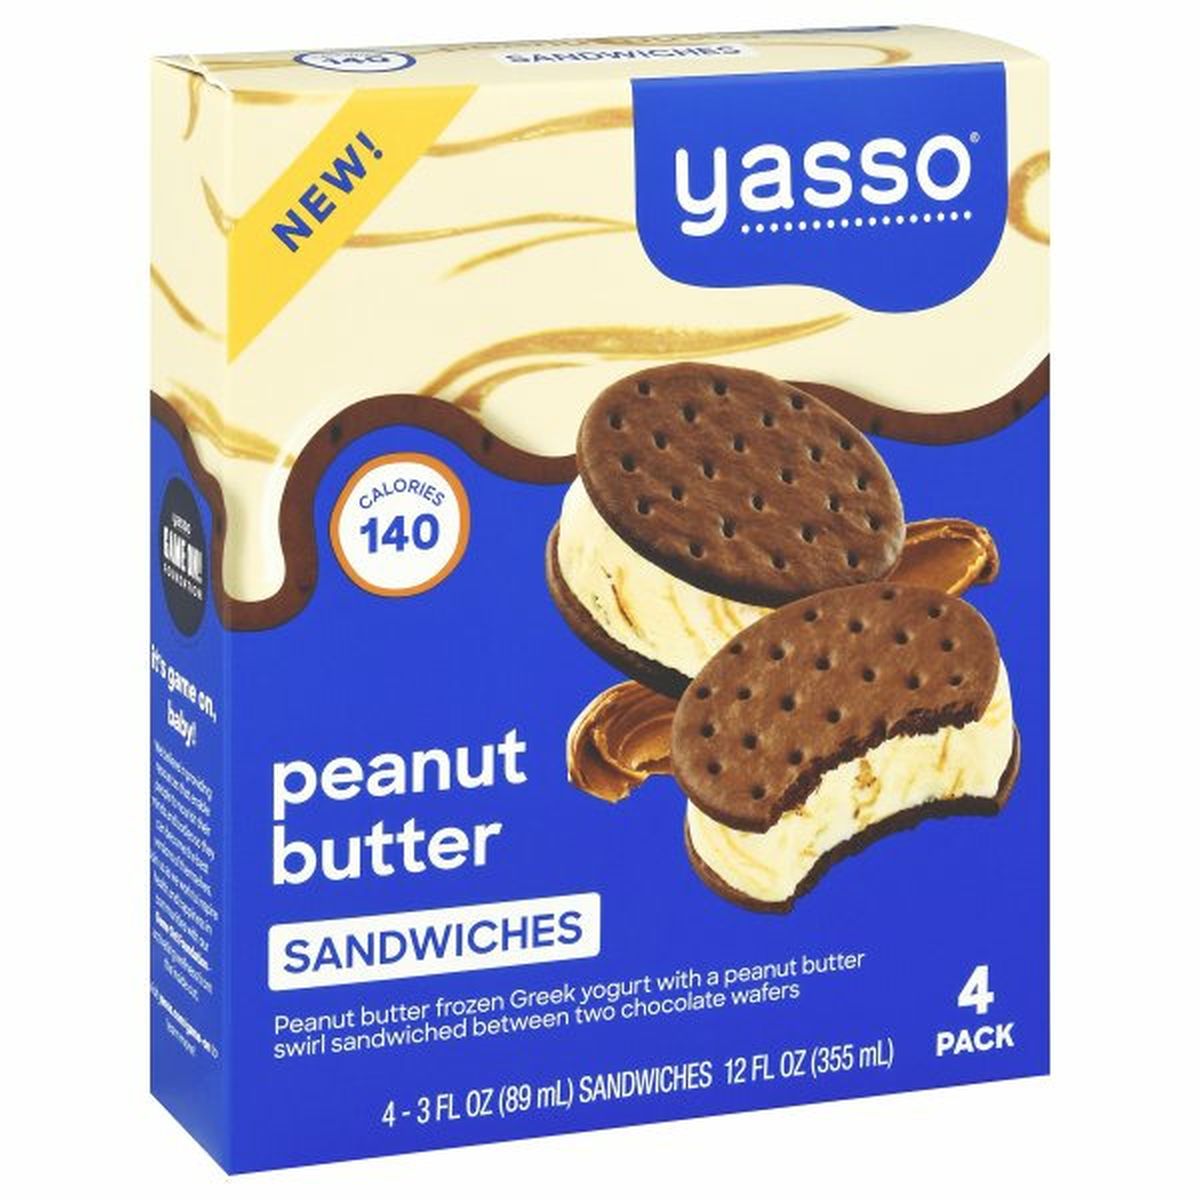 Calories in Yasso Sandwiches, Peanut Butter, 4 Pack